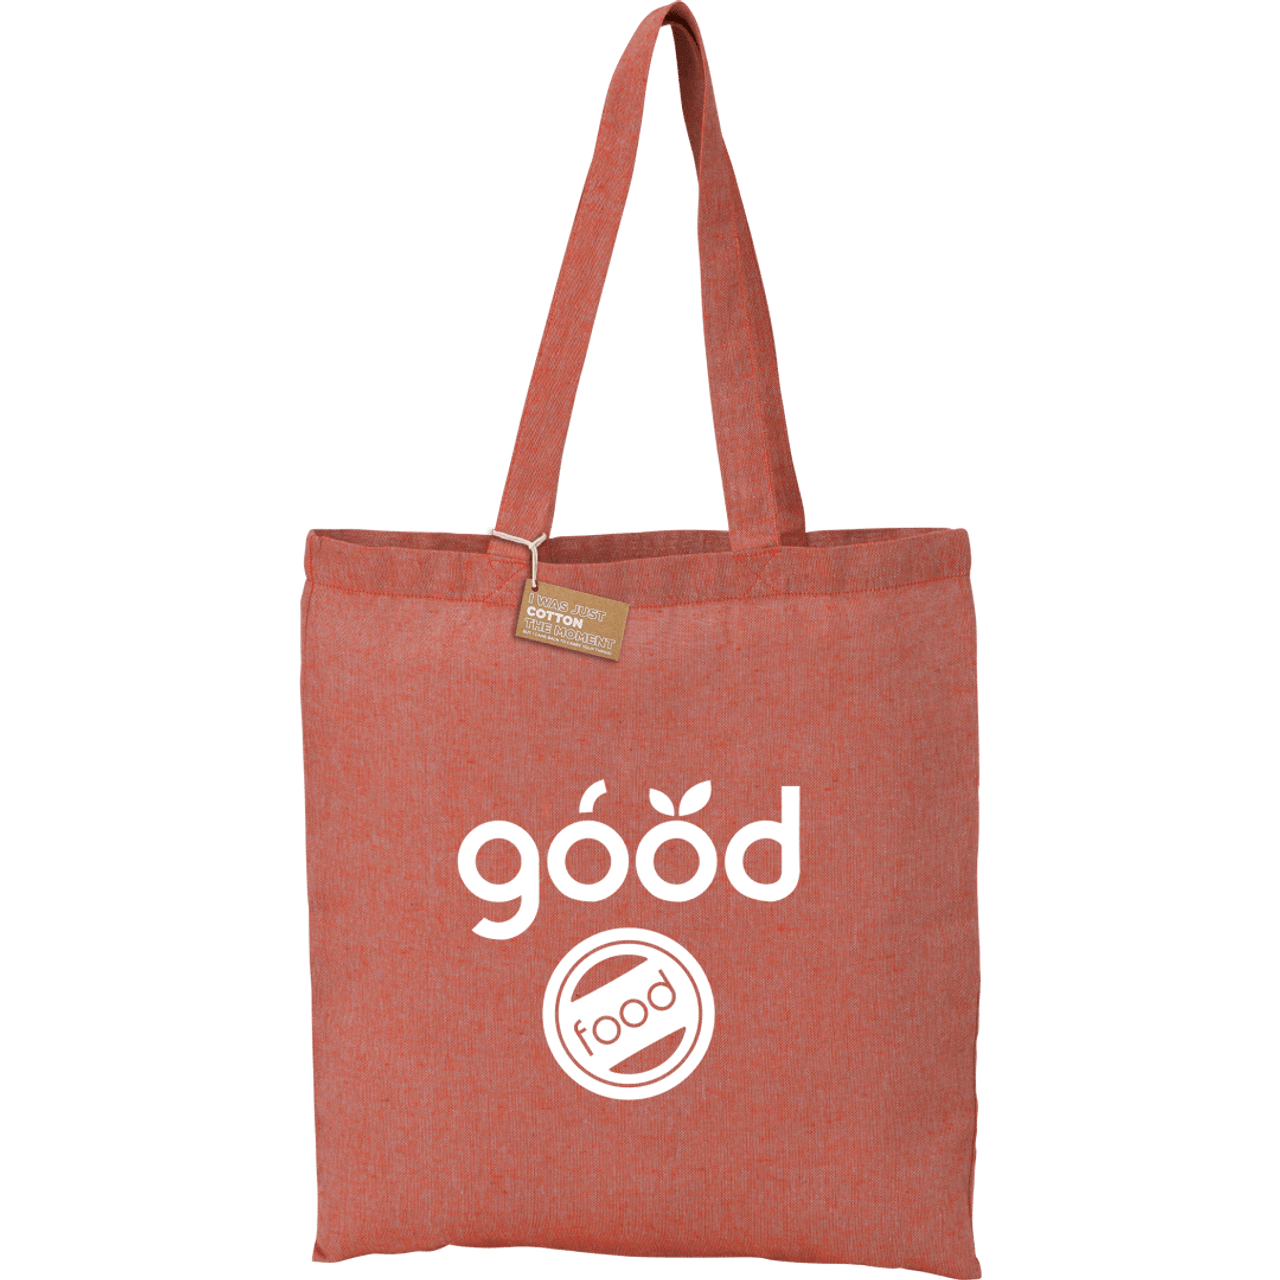 Custom Recycled 5oz Cotton Twill Tote